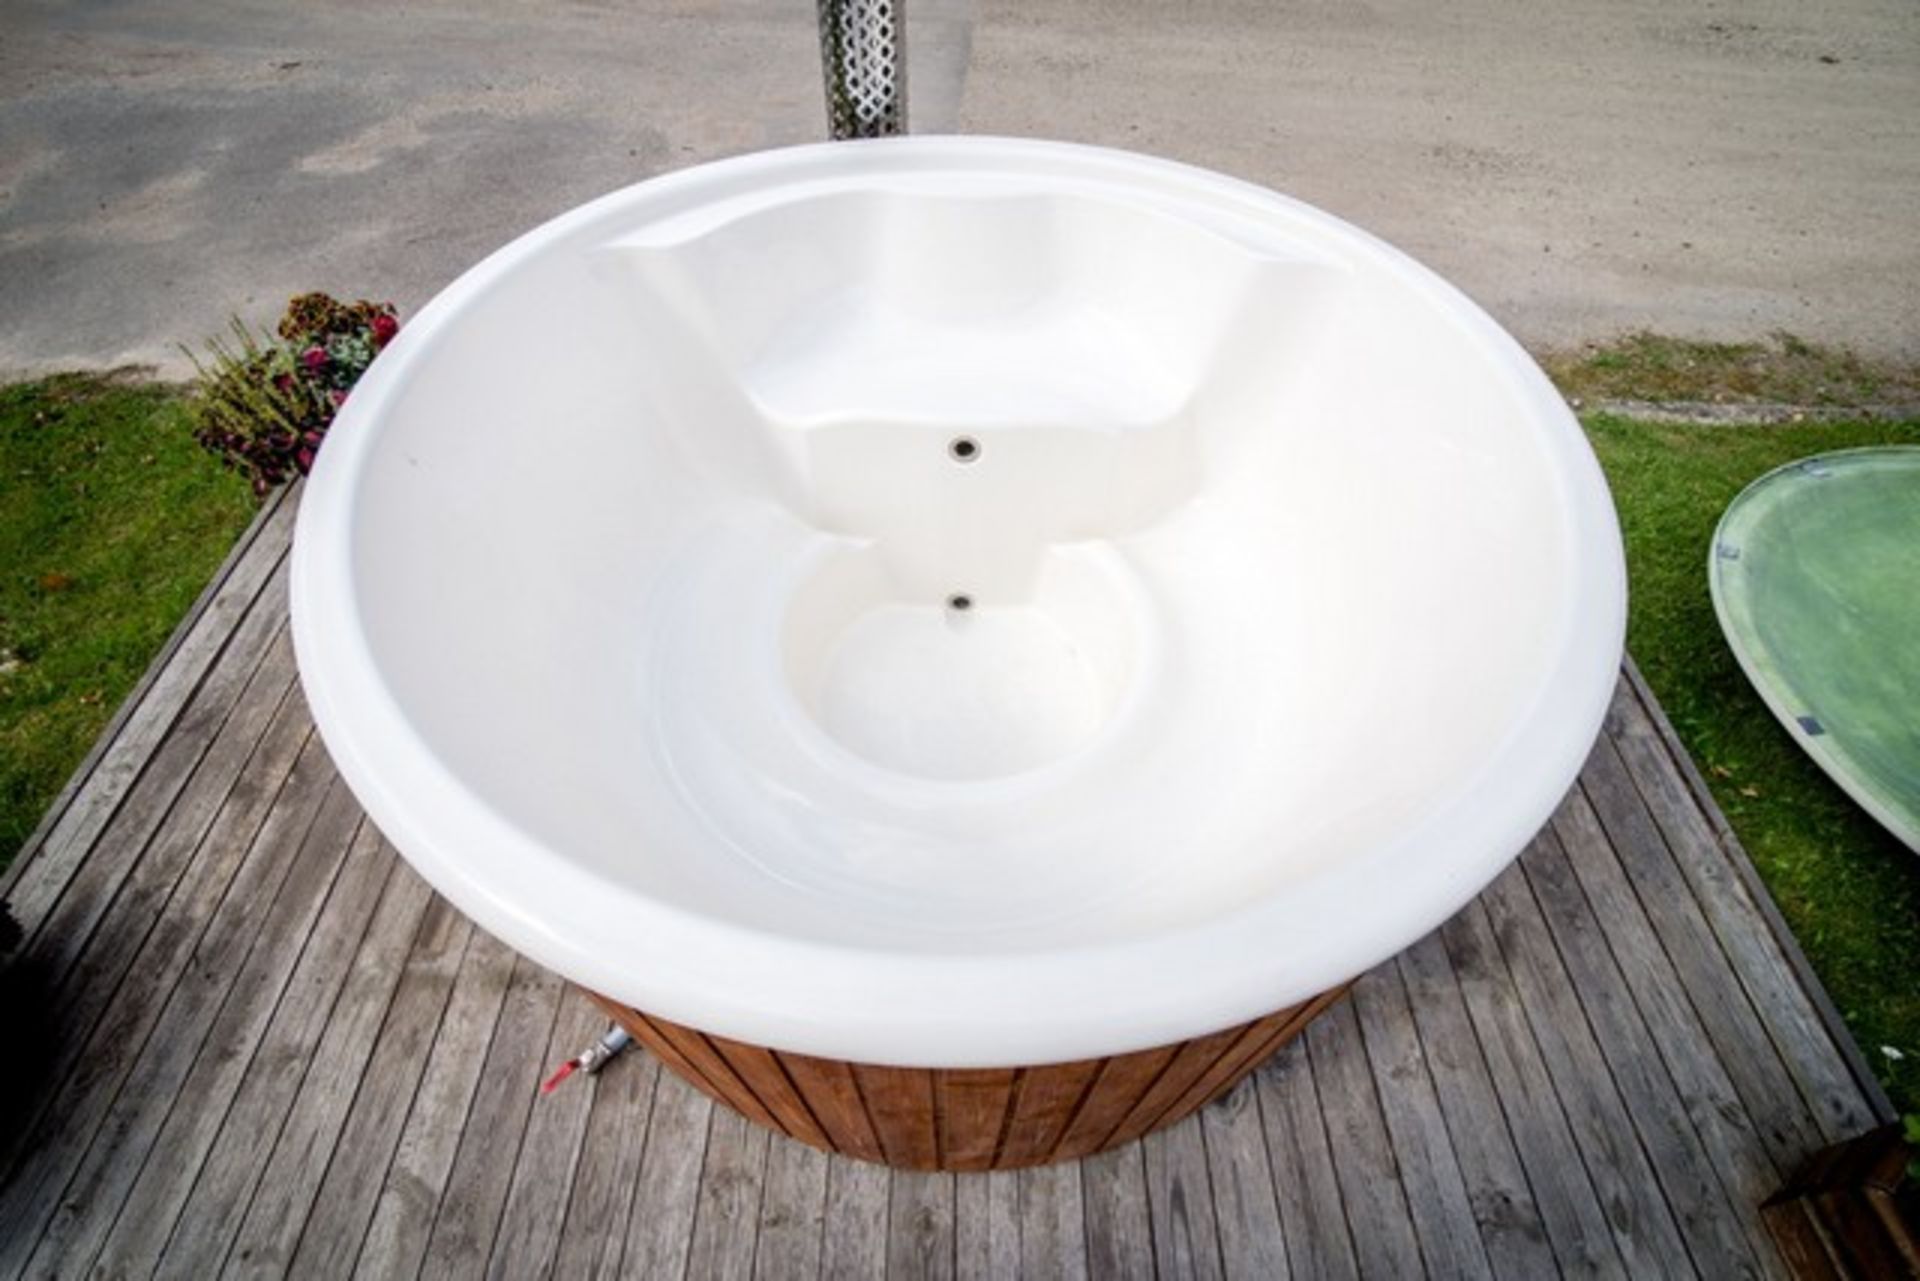 + VAT Brand New 1.8m Fiberglass Hot Tub with Stainless Steel Heater and Chimney - Hot Tub Made from - Image 3 of 4